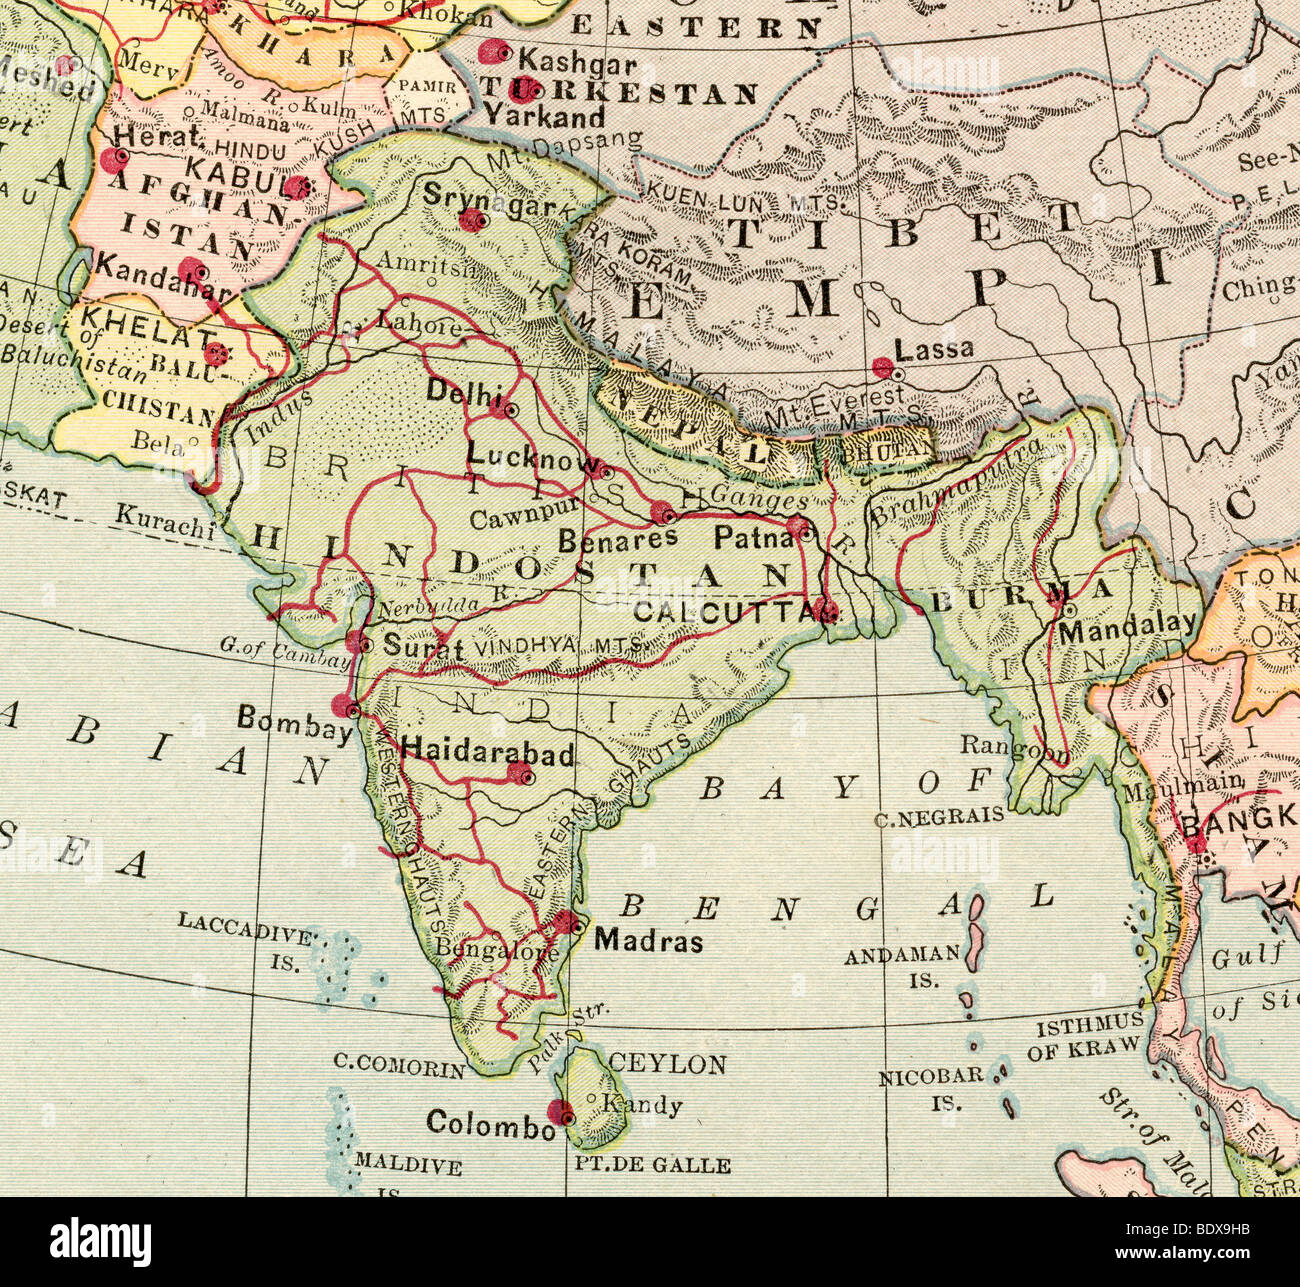 Original old map of India from 1875 geography textbook Stock Photo